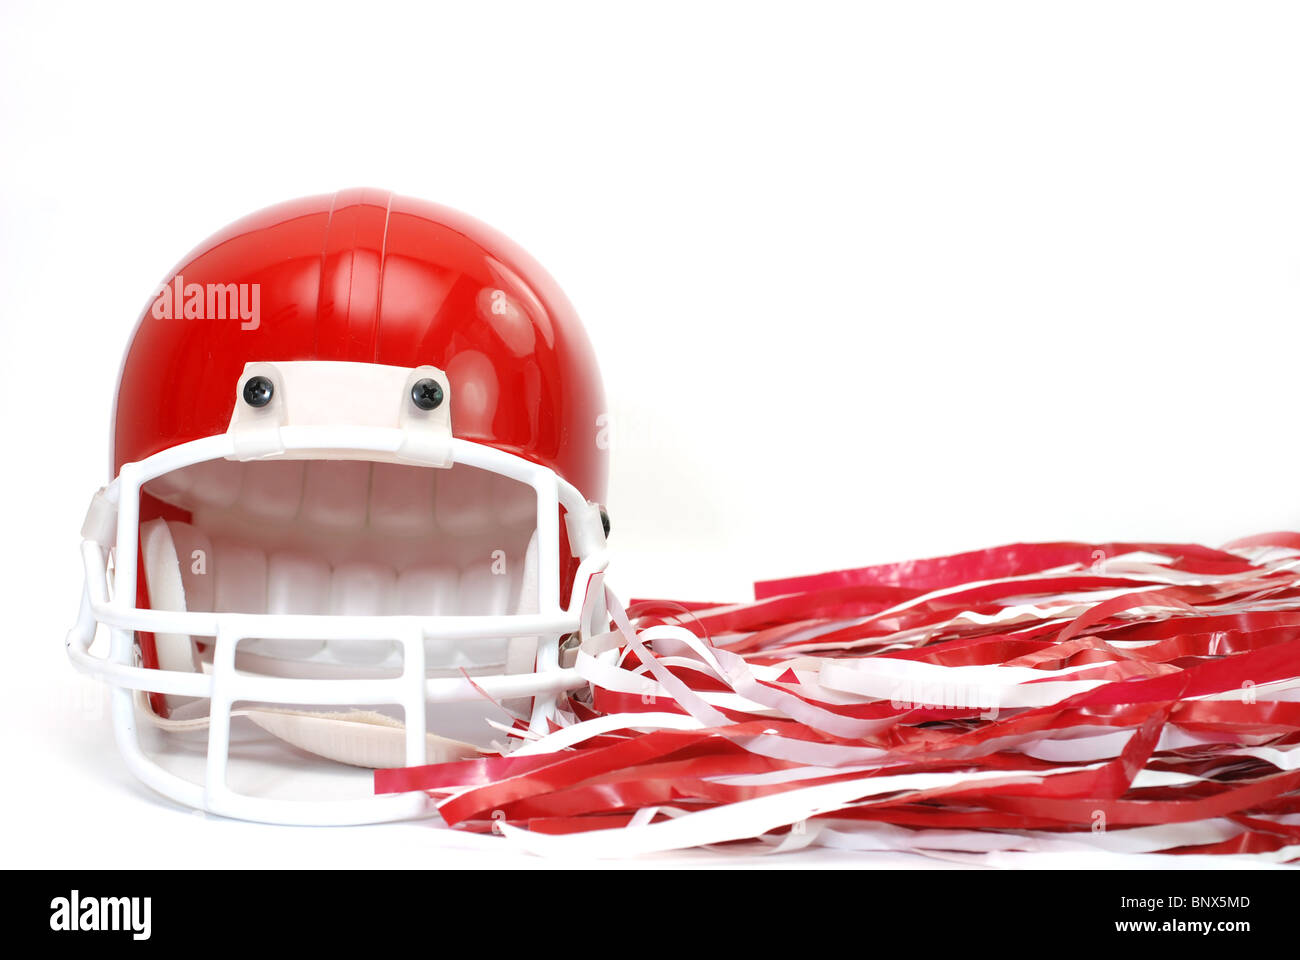 Red football helmet and pom poms isolated on white background. Stock Photo